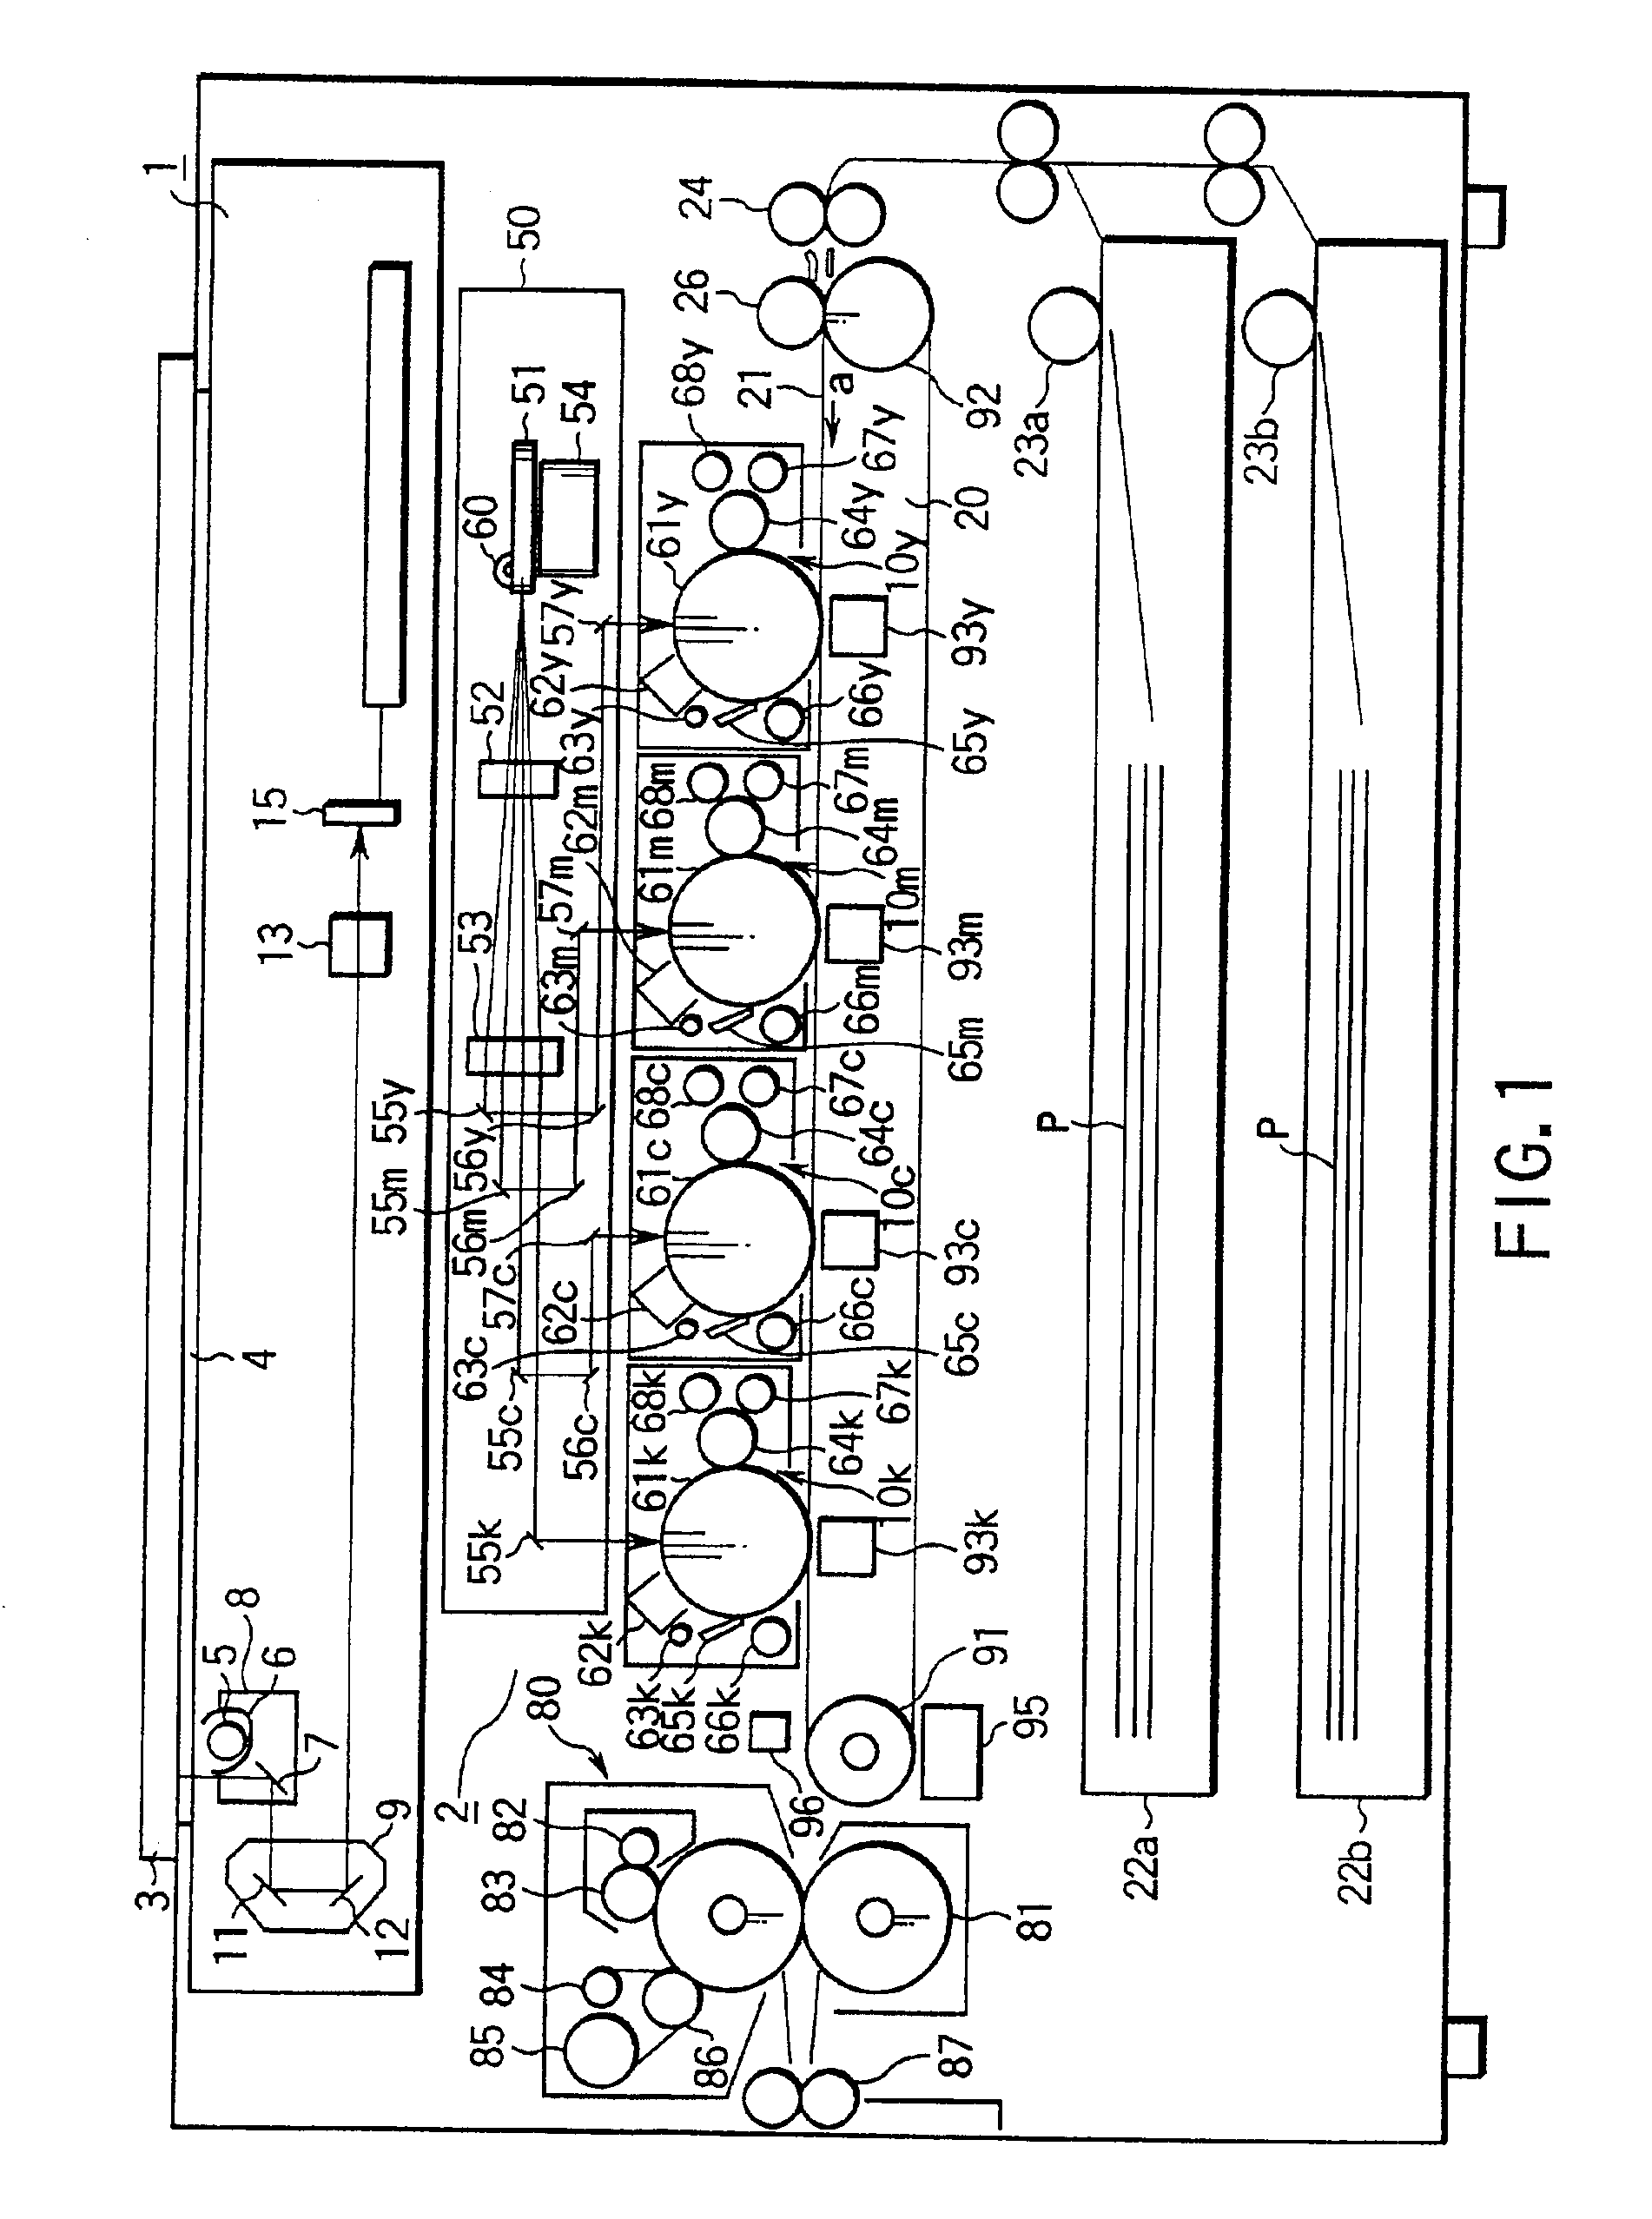 Image forming system with scanner capable of changing magnification of scanned image